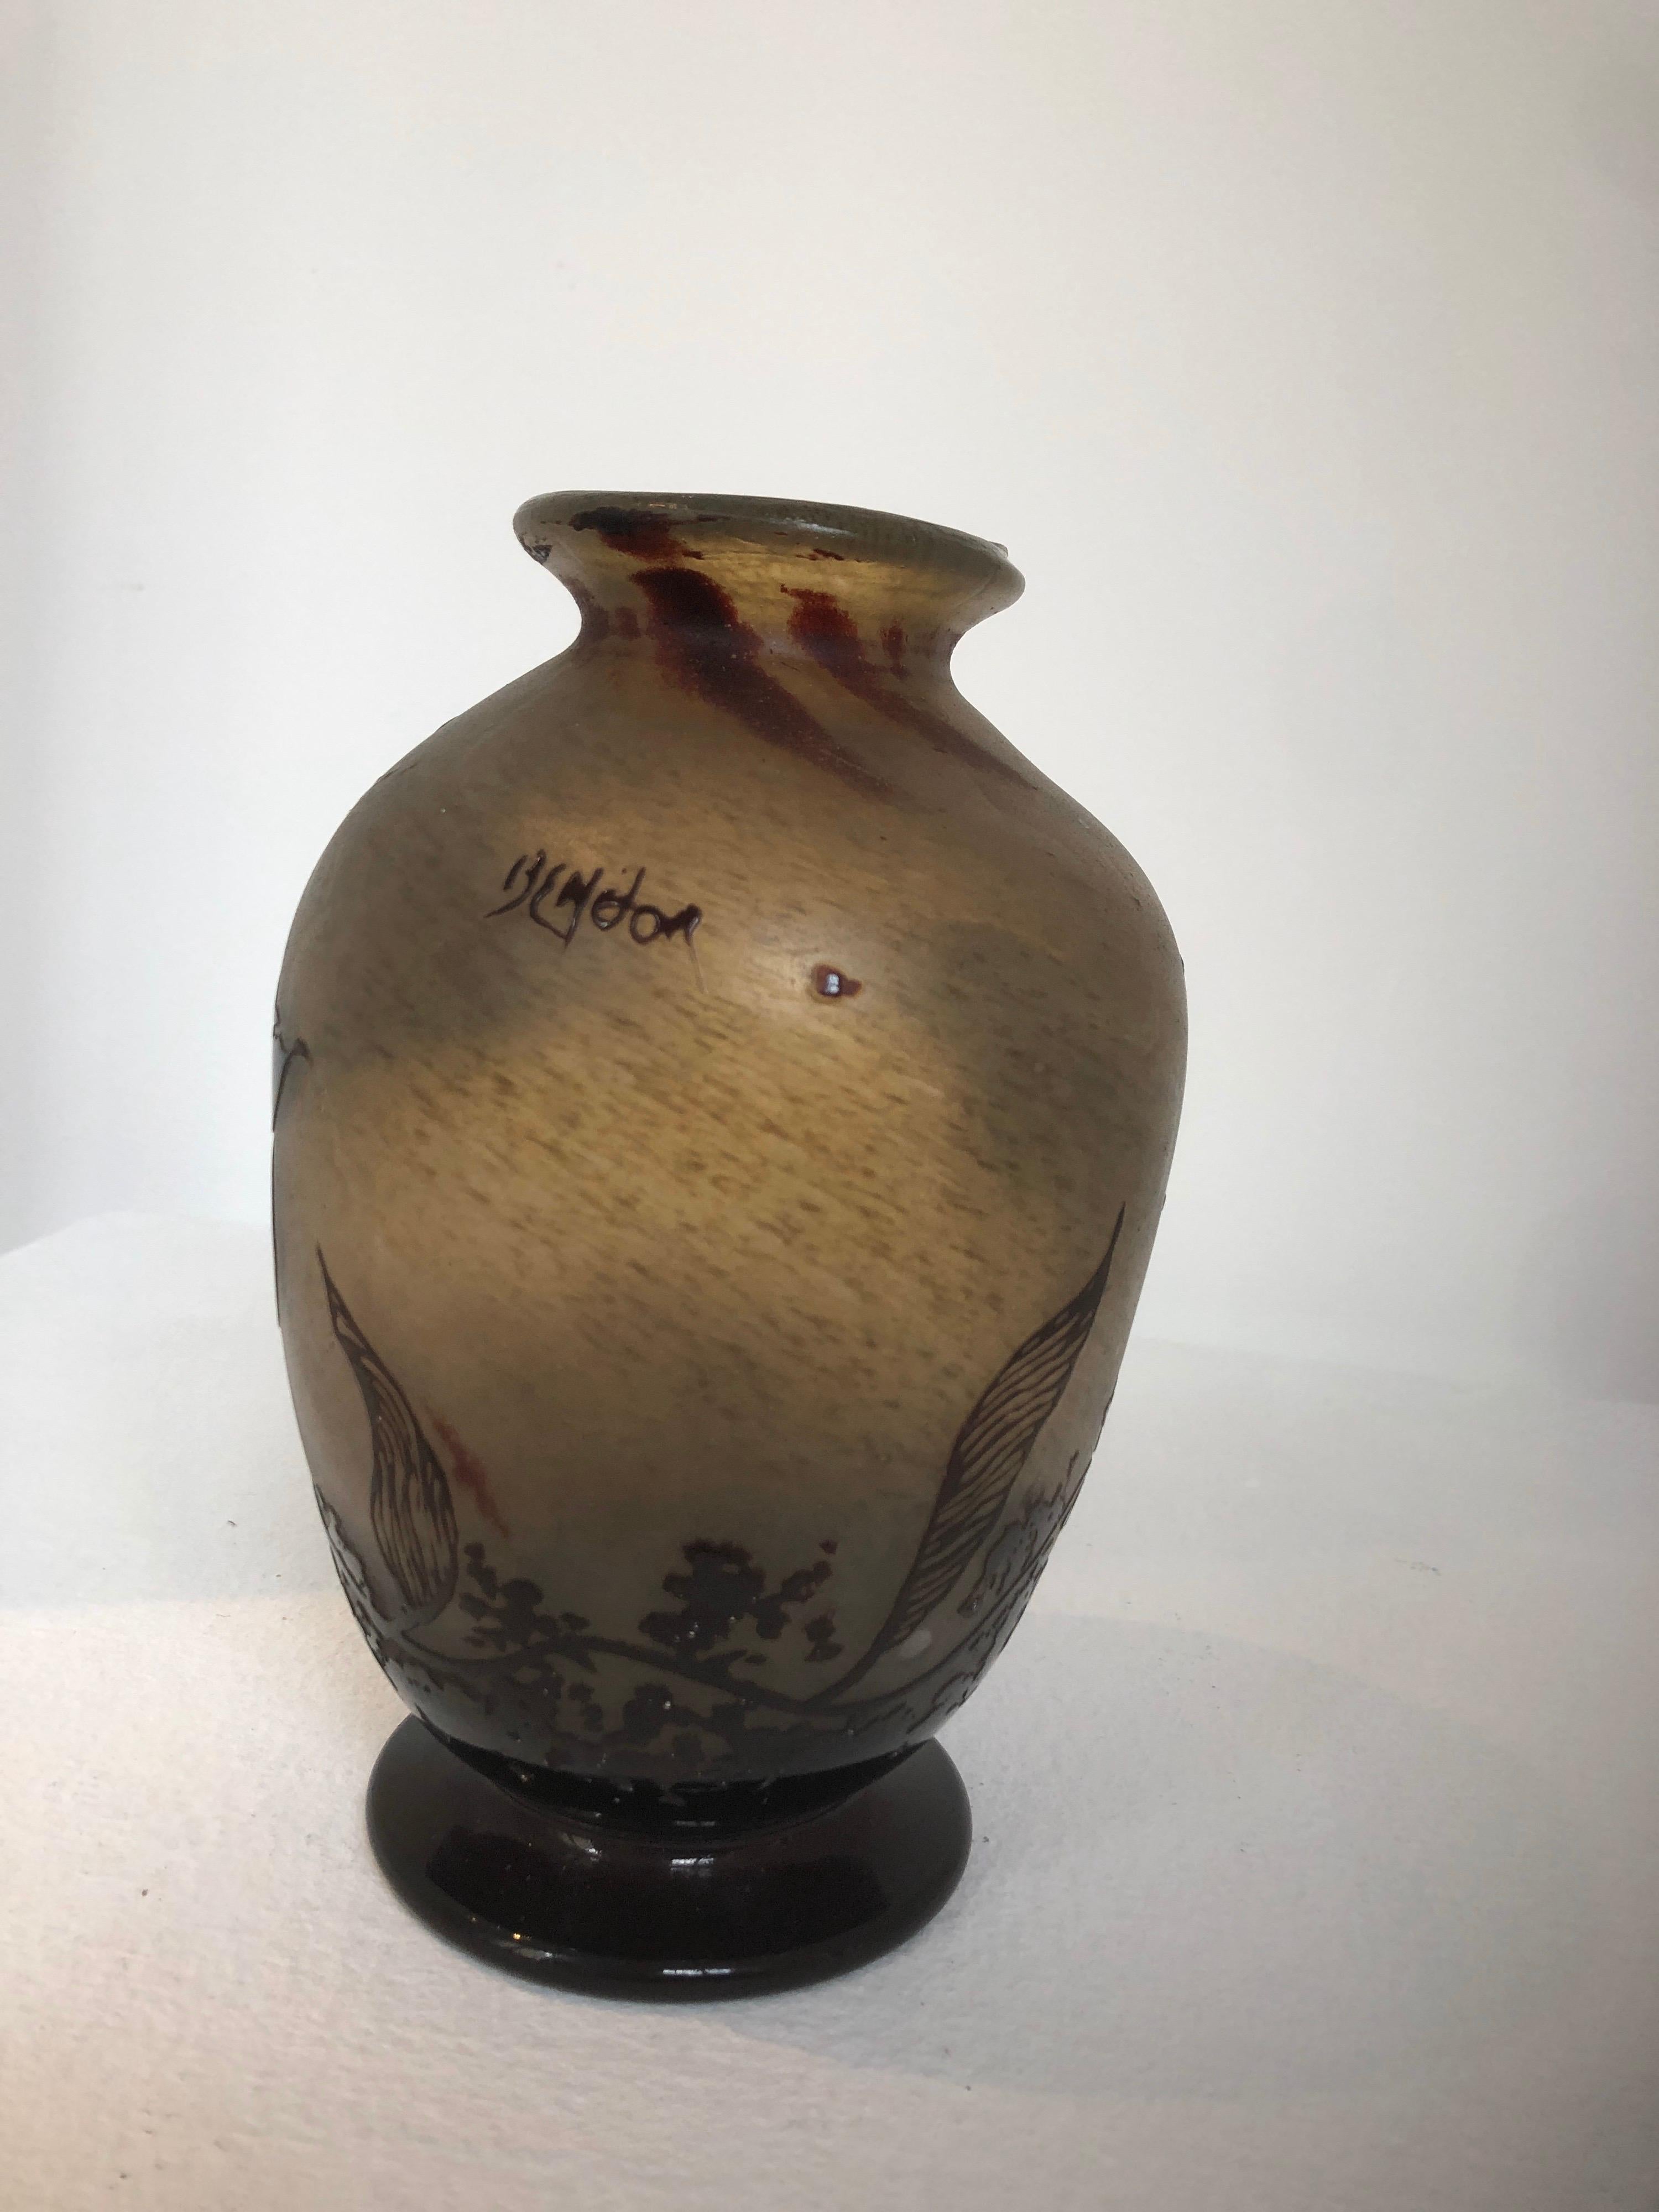 Blown Glass Vase of Benor Cleared Acid Multilayer Glass with Floral Decoration In Good Condition For Sale In Paris, France